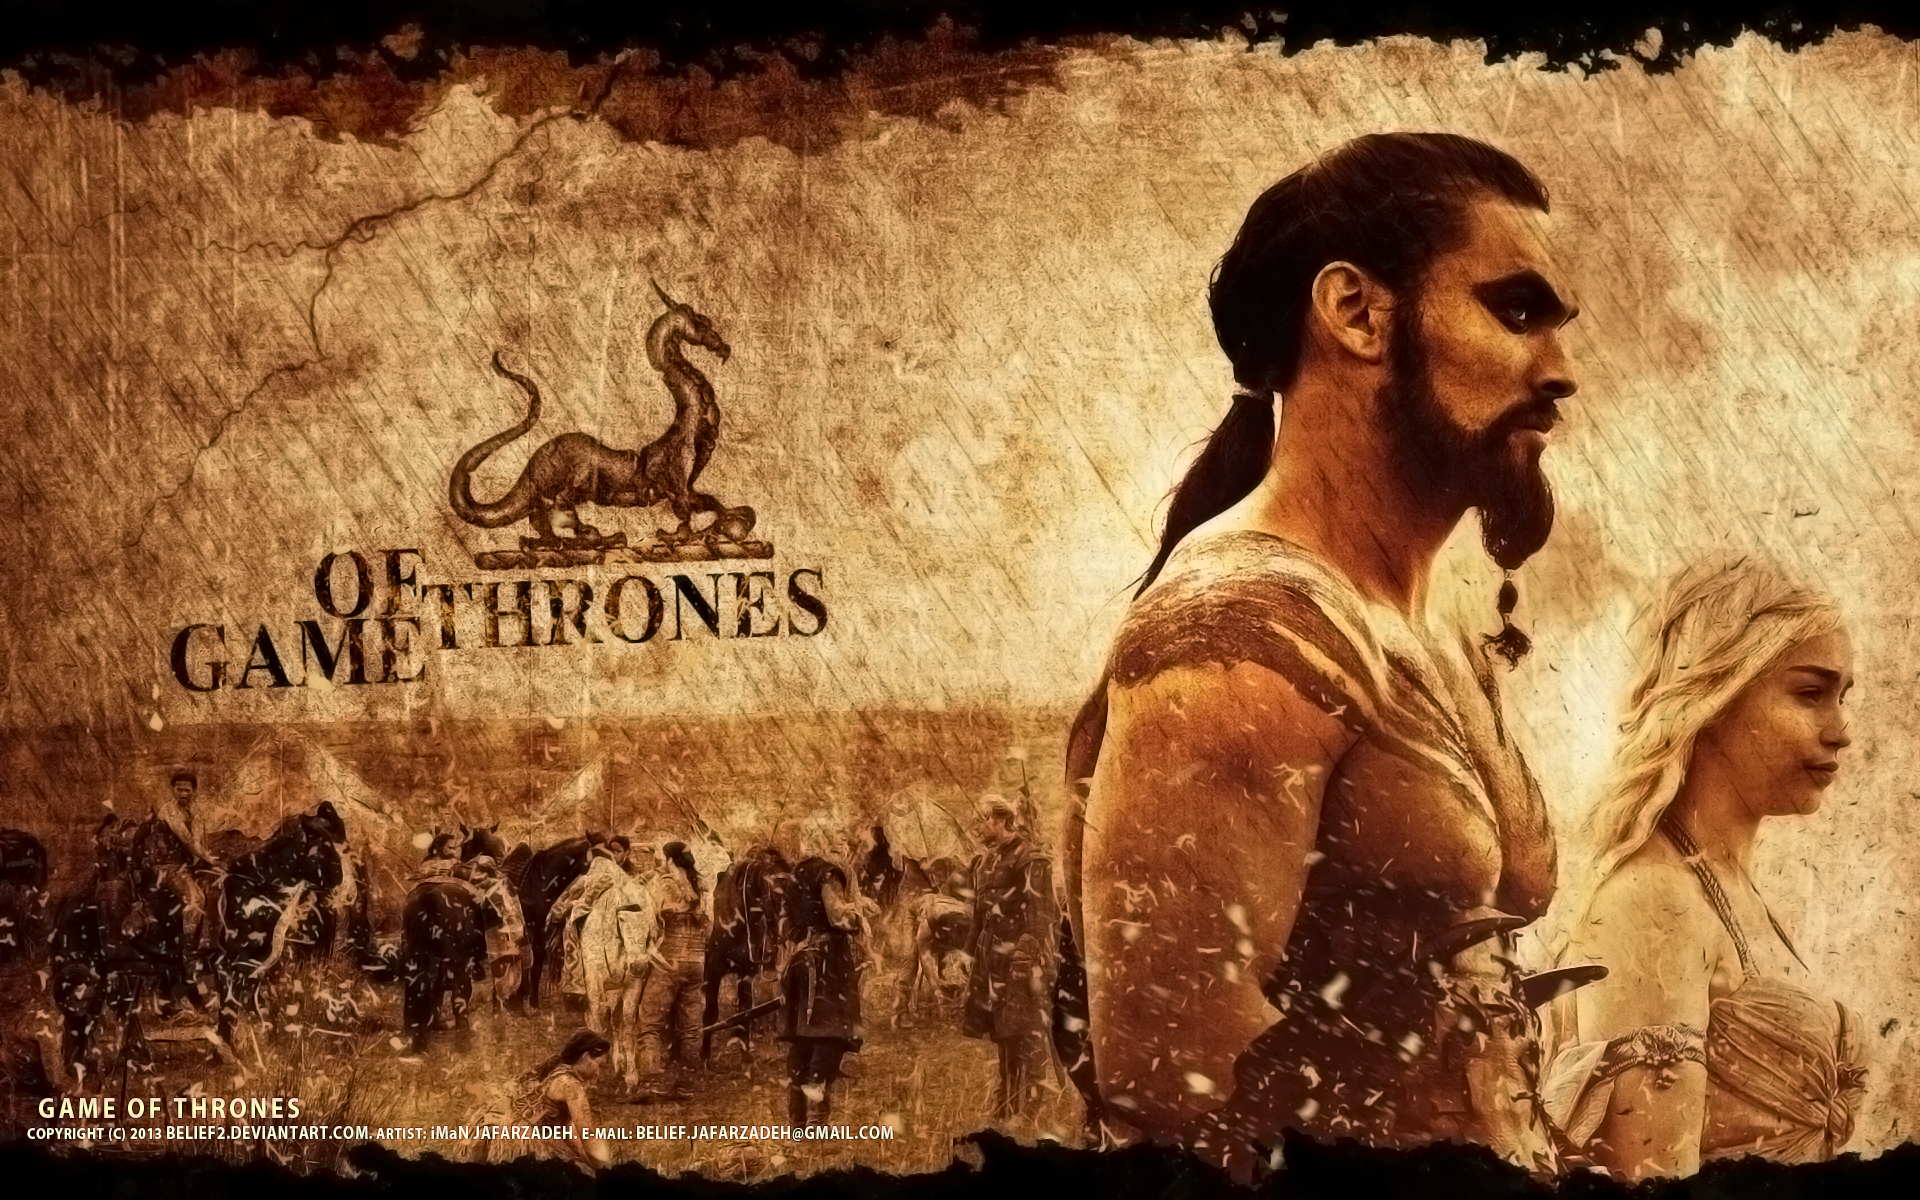 Game of Thrones TV Series Wallpaper, High Definition